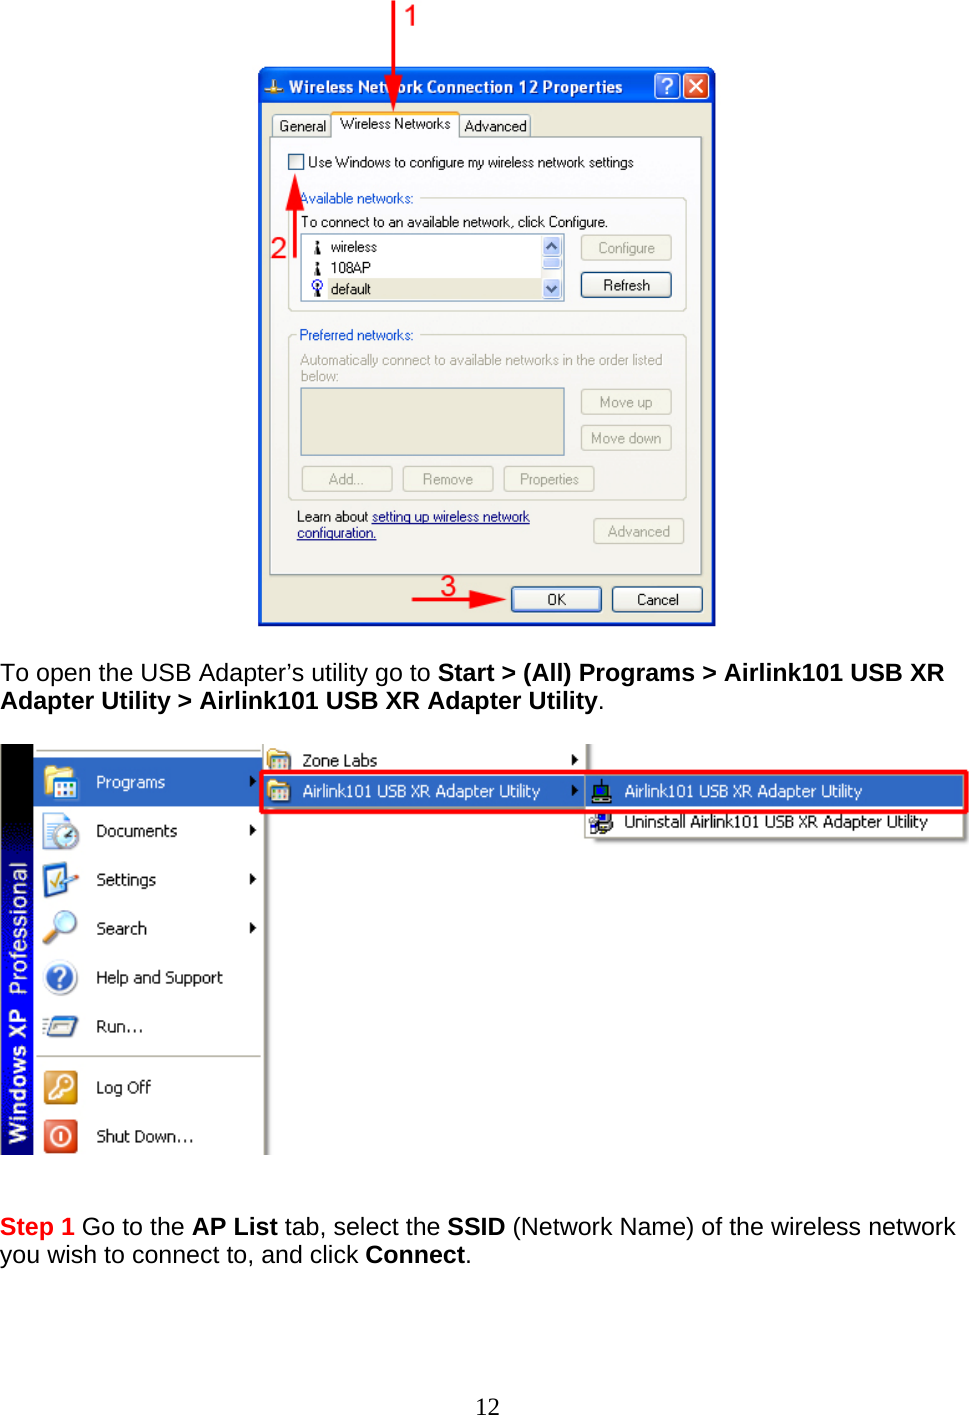 12   To open the USB Adapter’s utility go to Start &gt; (All) Programs &gt; Airlink101 USB XR Adapter Utility &gt; Airlink101 USB XR Adapter Utility.     Step 1 Go to the AP List tab, select the SSID (Network Name) of the wireless network you wish to connect to, and click Connect.  